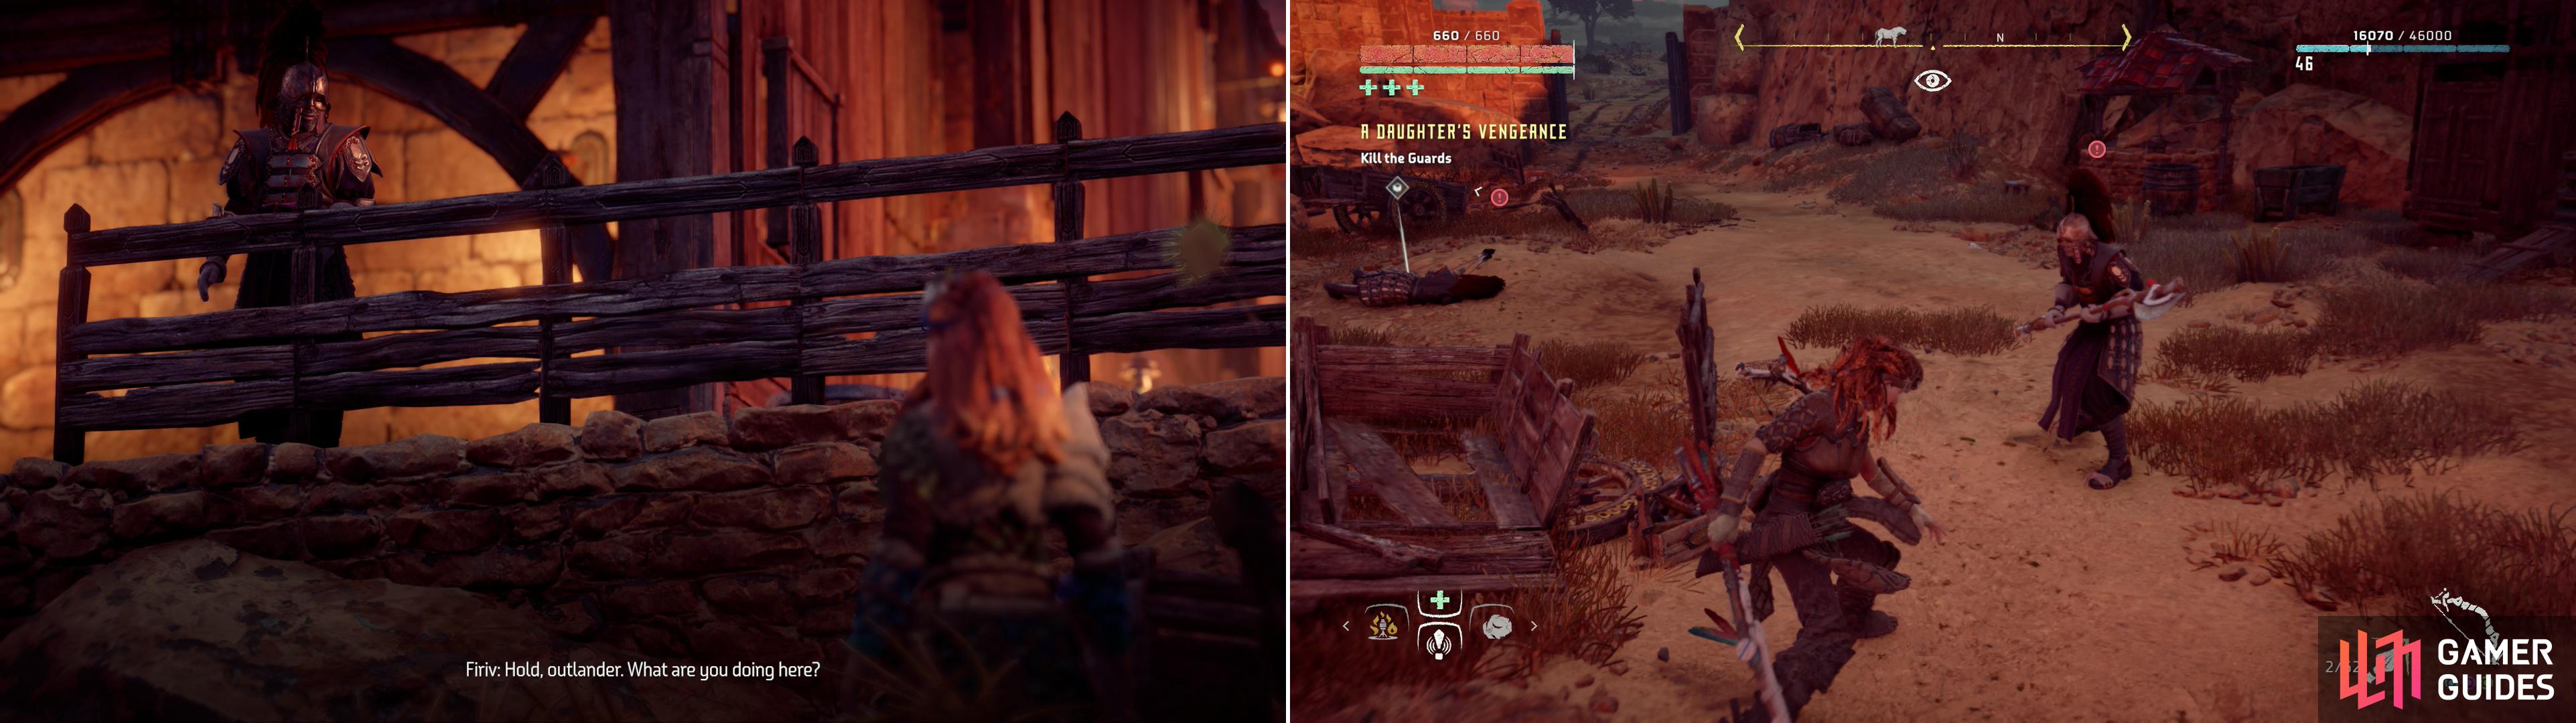 The guards at Lonesome Rock will get suspicious if you poke around too much (left) and your investigation will ultimately result in violence (right).